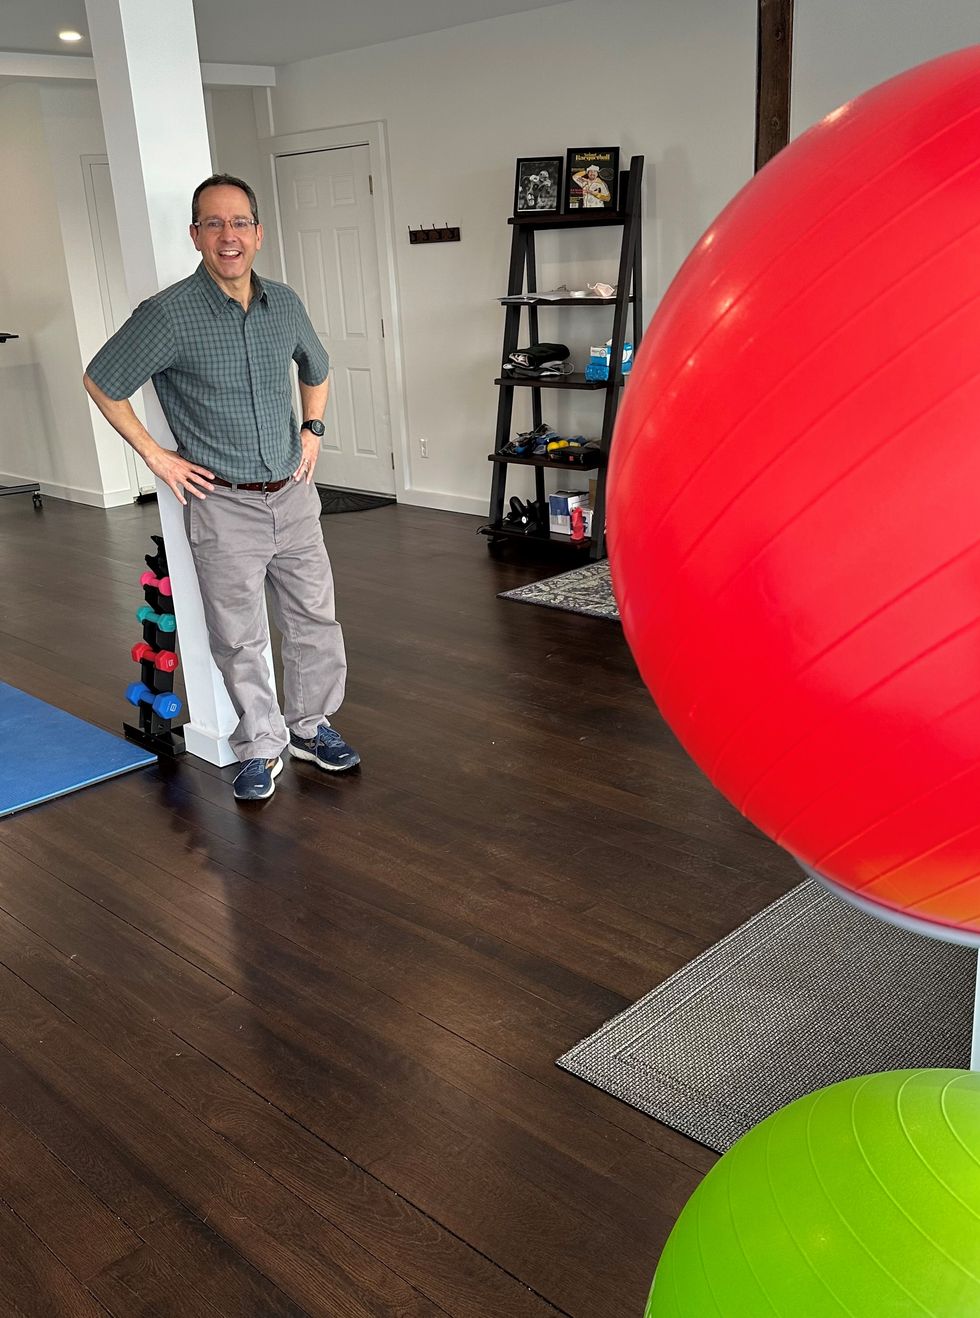 Physical therapist finds new space